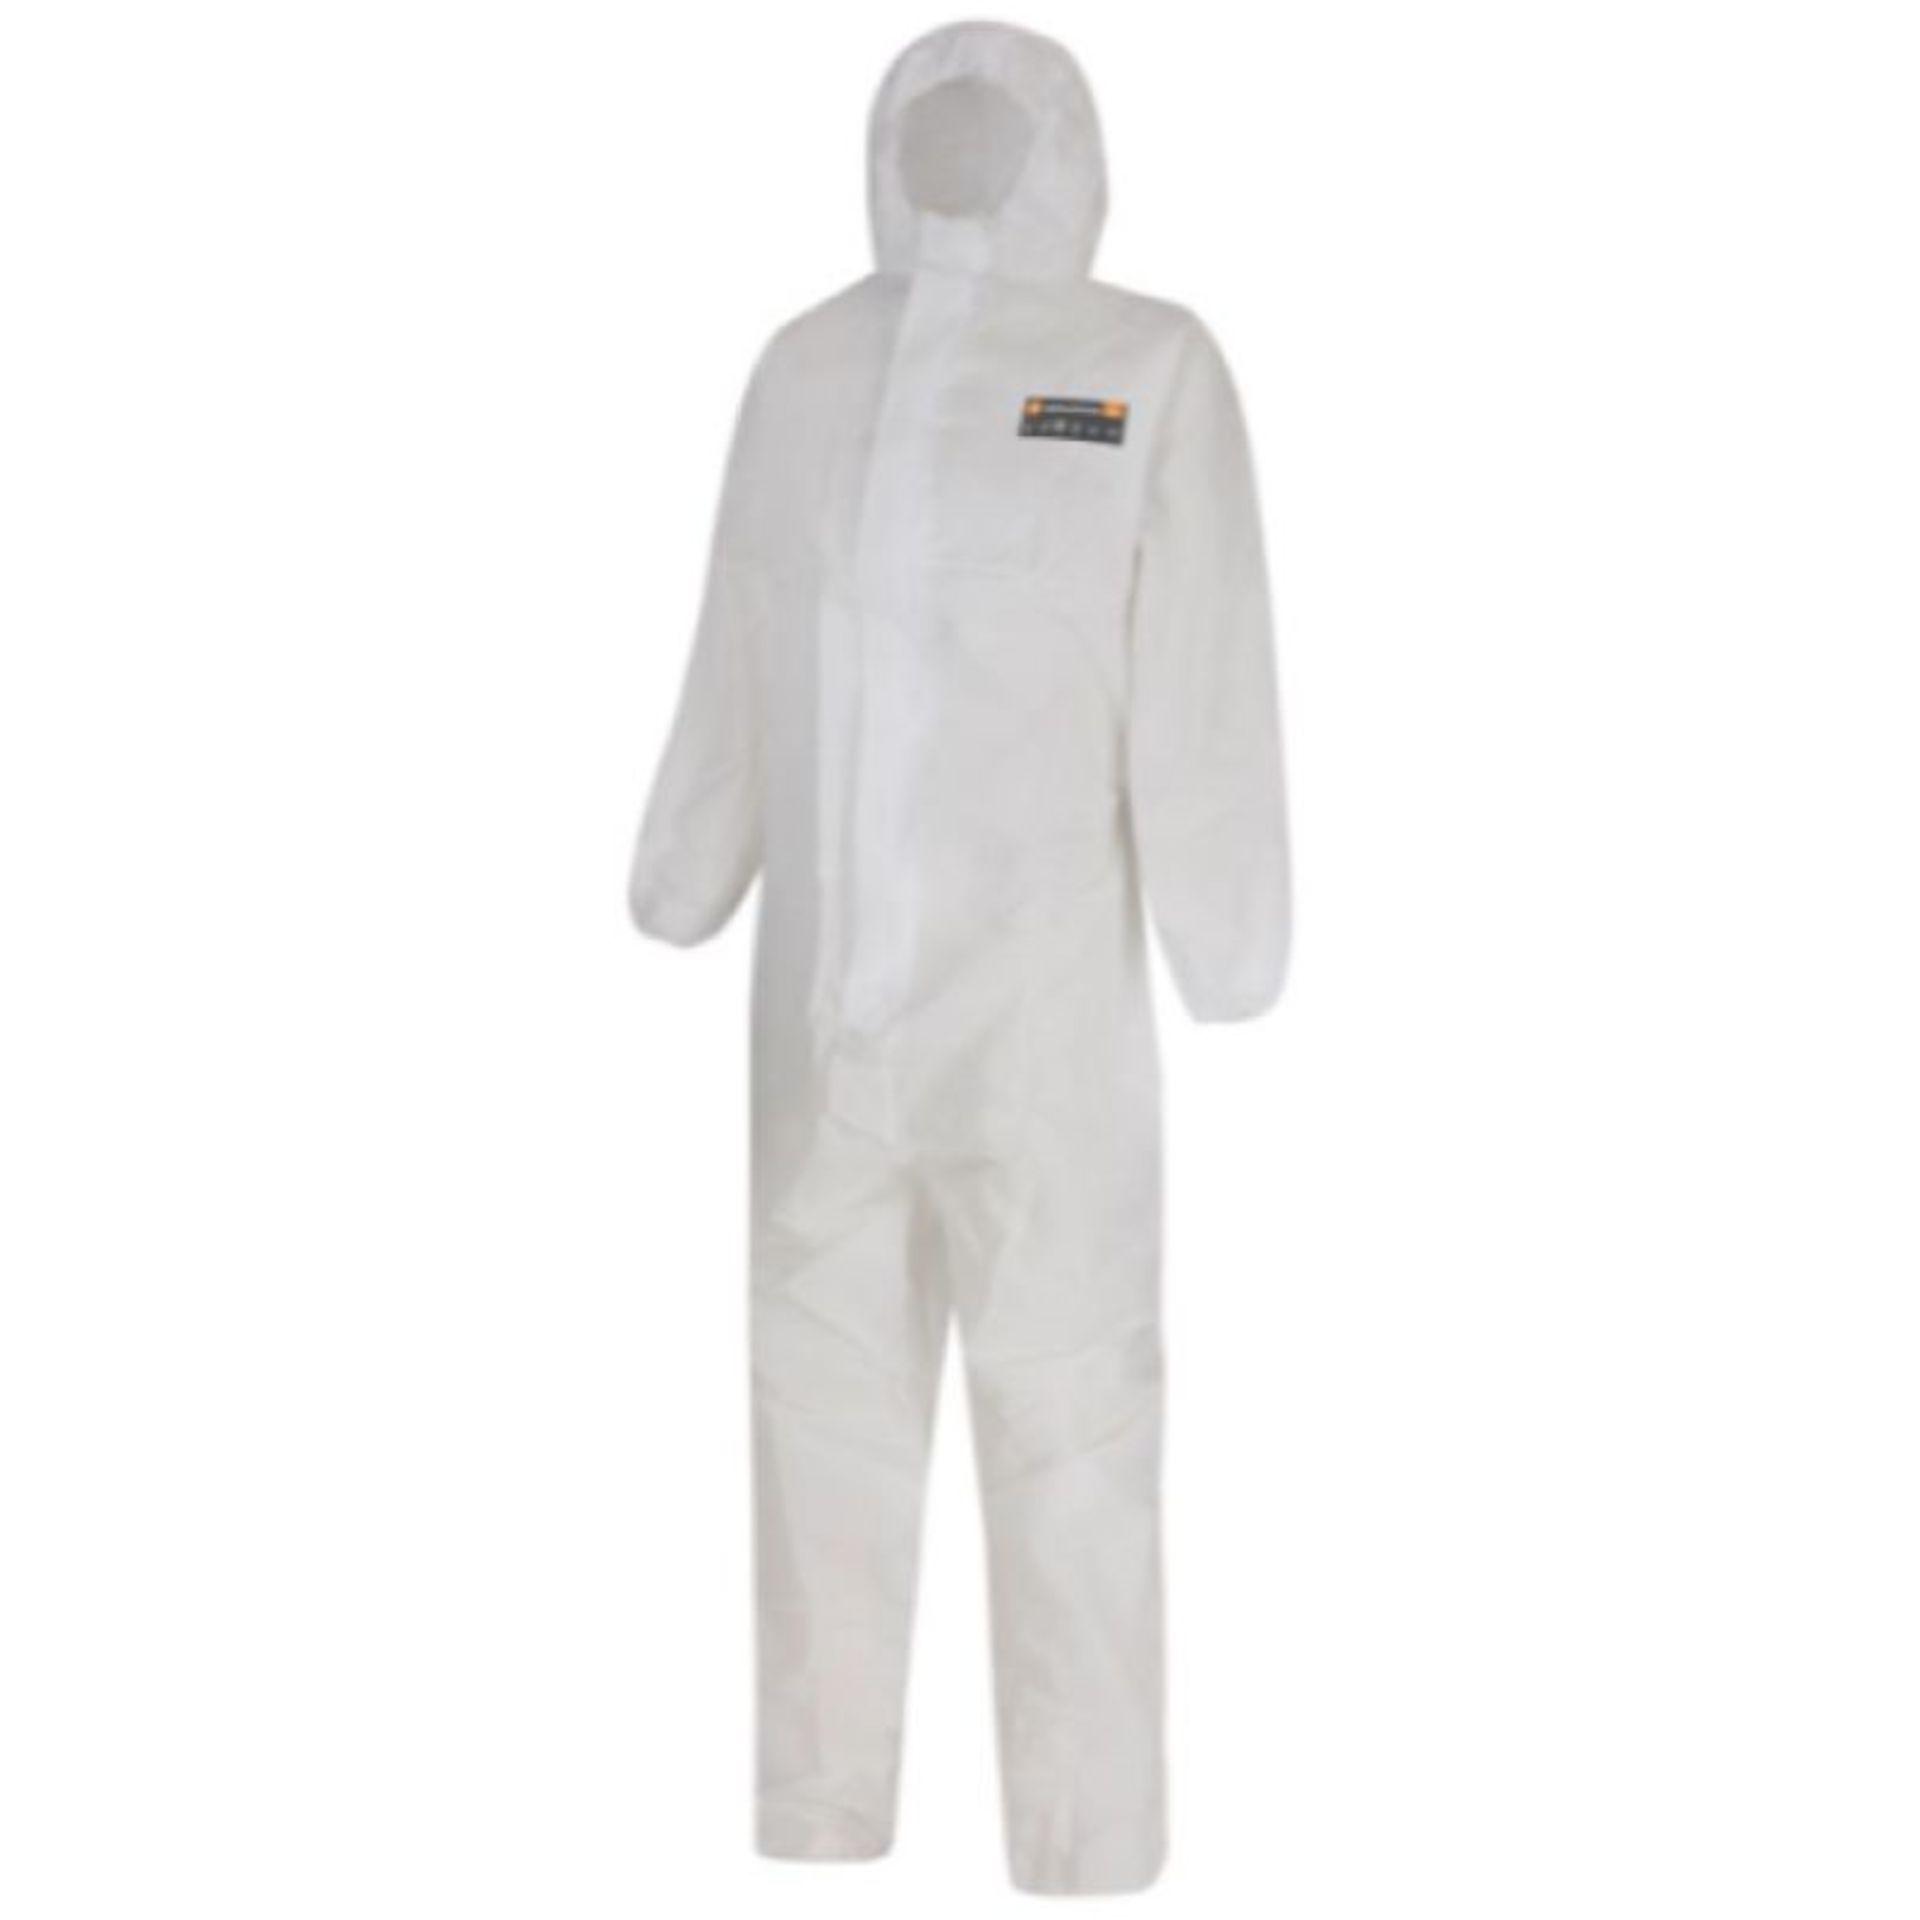 ALPHASHIELD 1000 S1BH DISPOSABLE PROTECTIVE COVERALLS - x650 (expiry date 2027)